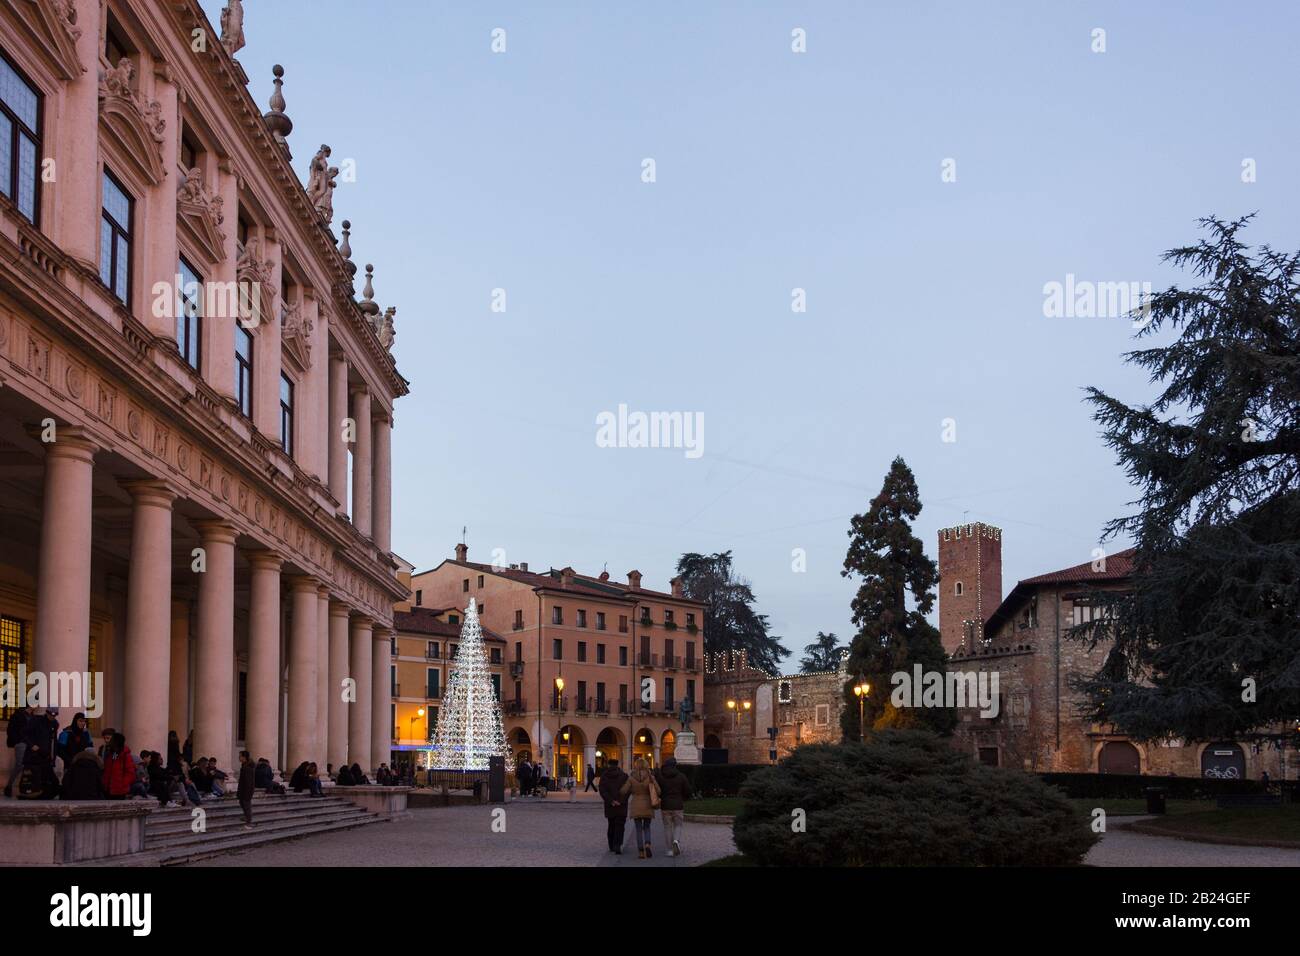 Vicenza, Italy. December 26, 2016: Palazzo Chiericati is a Renaissance building located in Vicenza. Designed as a noble residence for the Counts Chier Stock Photo